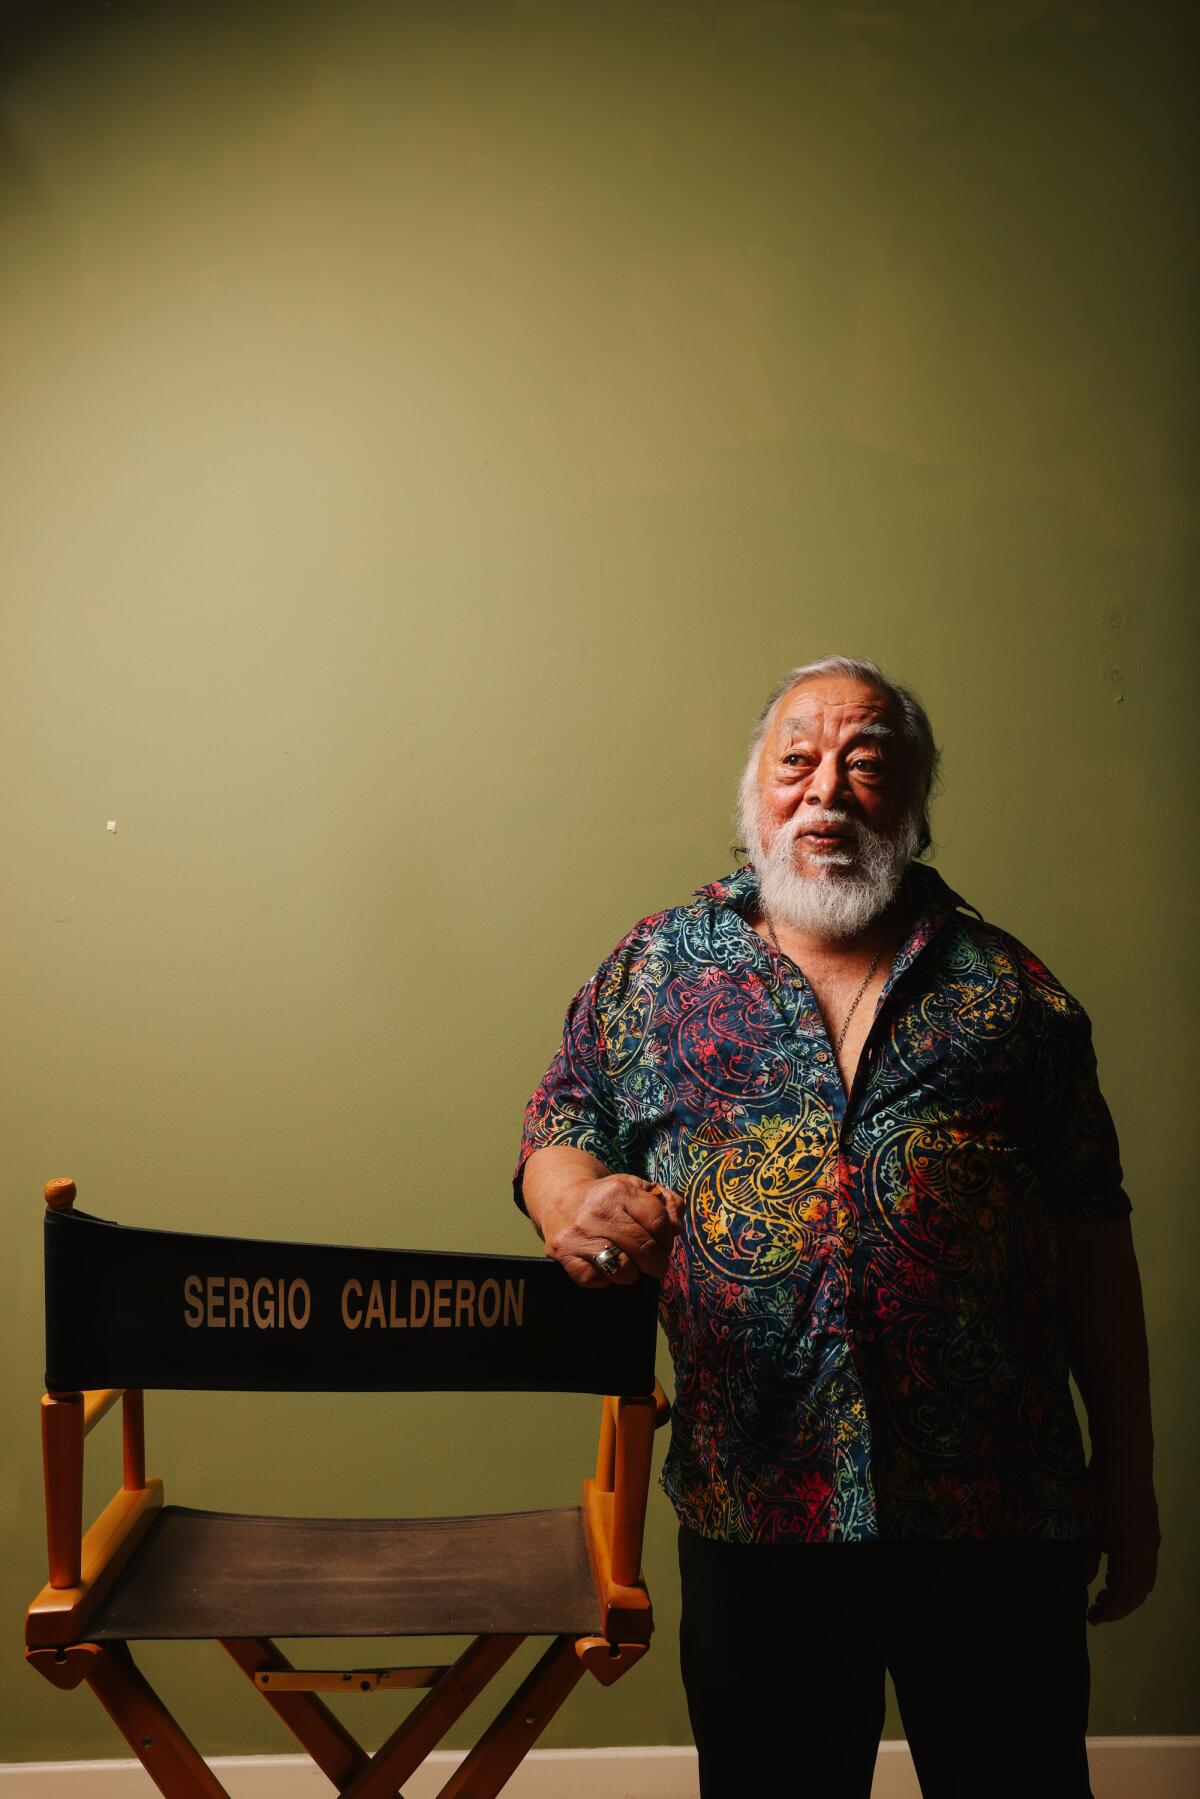 Sergio Calderón in a patterned shirt and black pants resting his right arm on a director's chair with his name on it